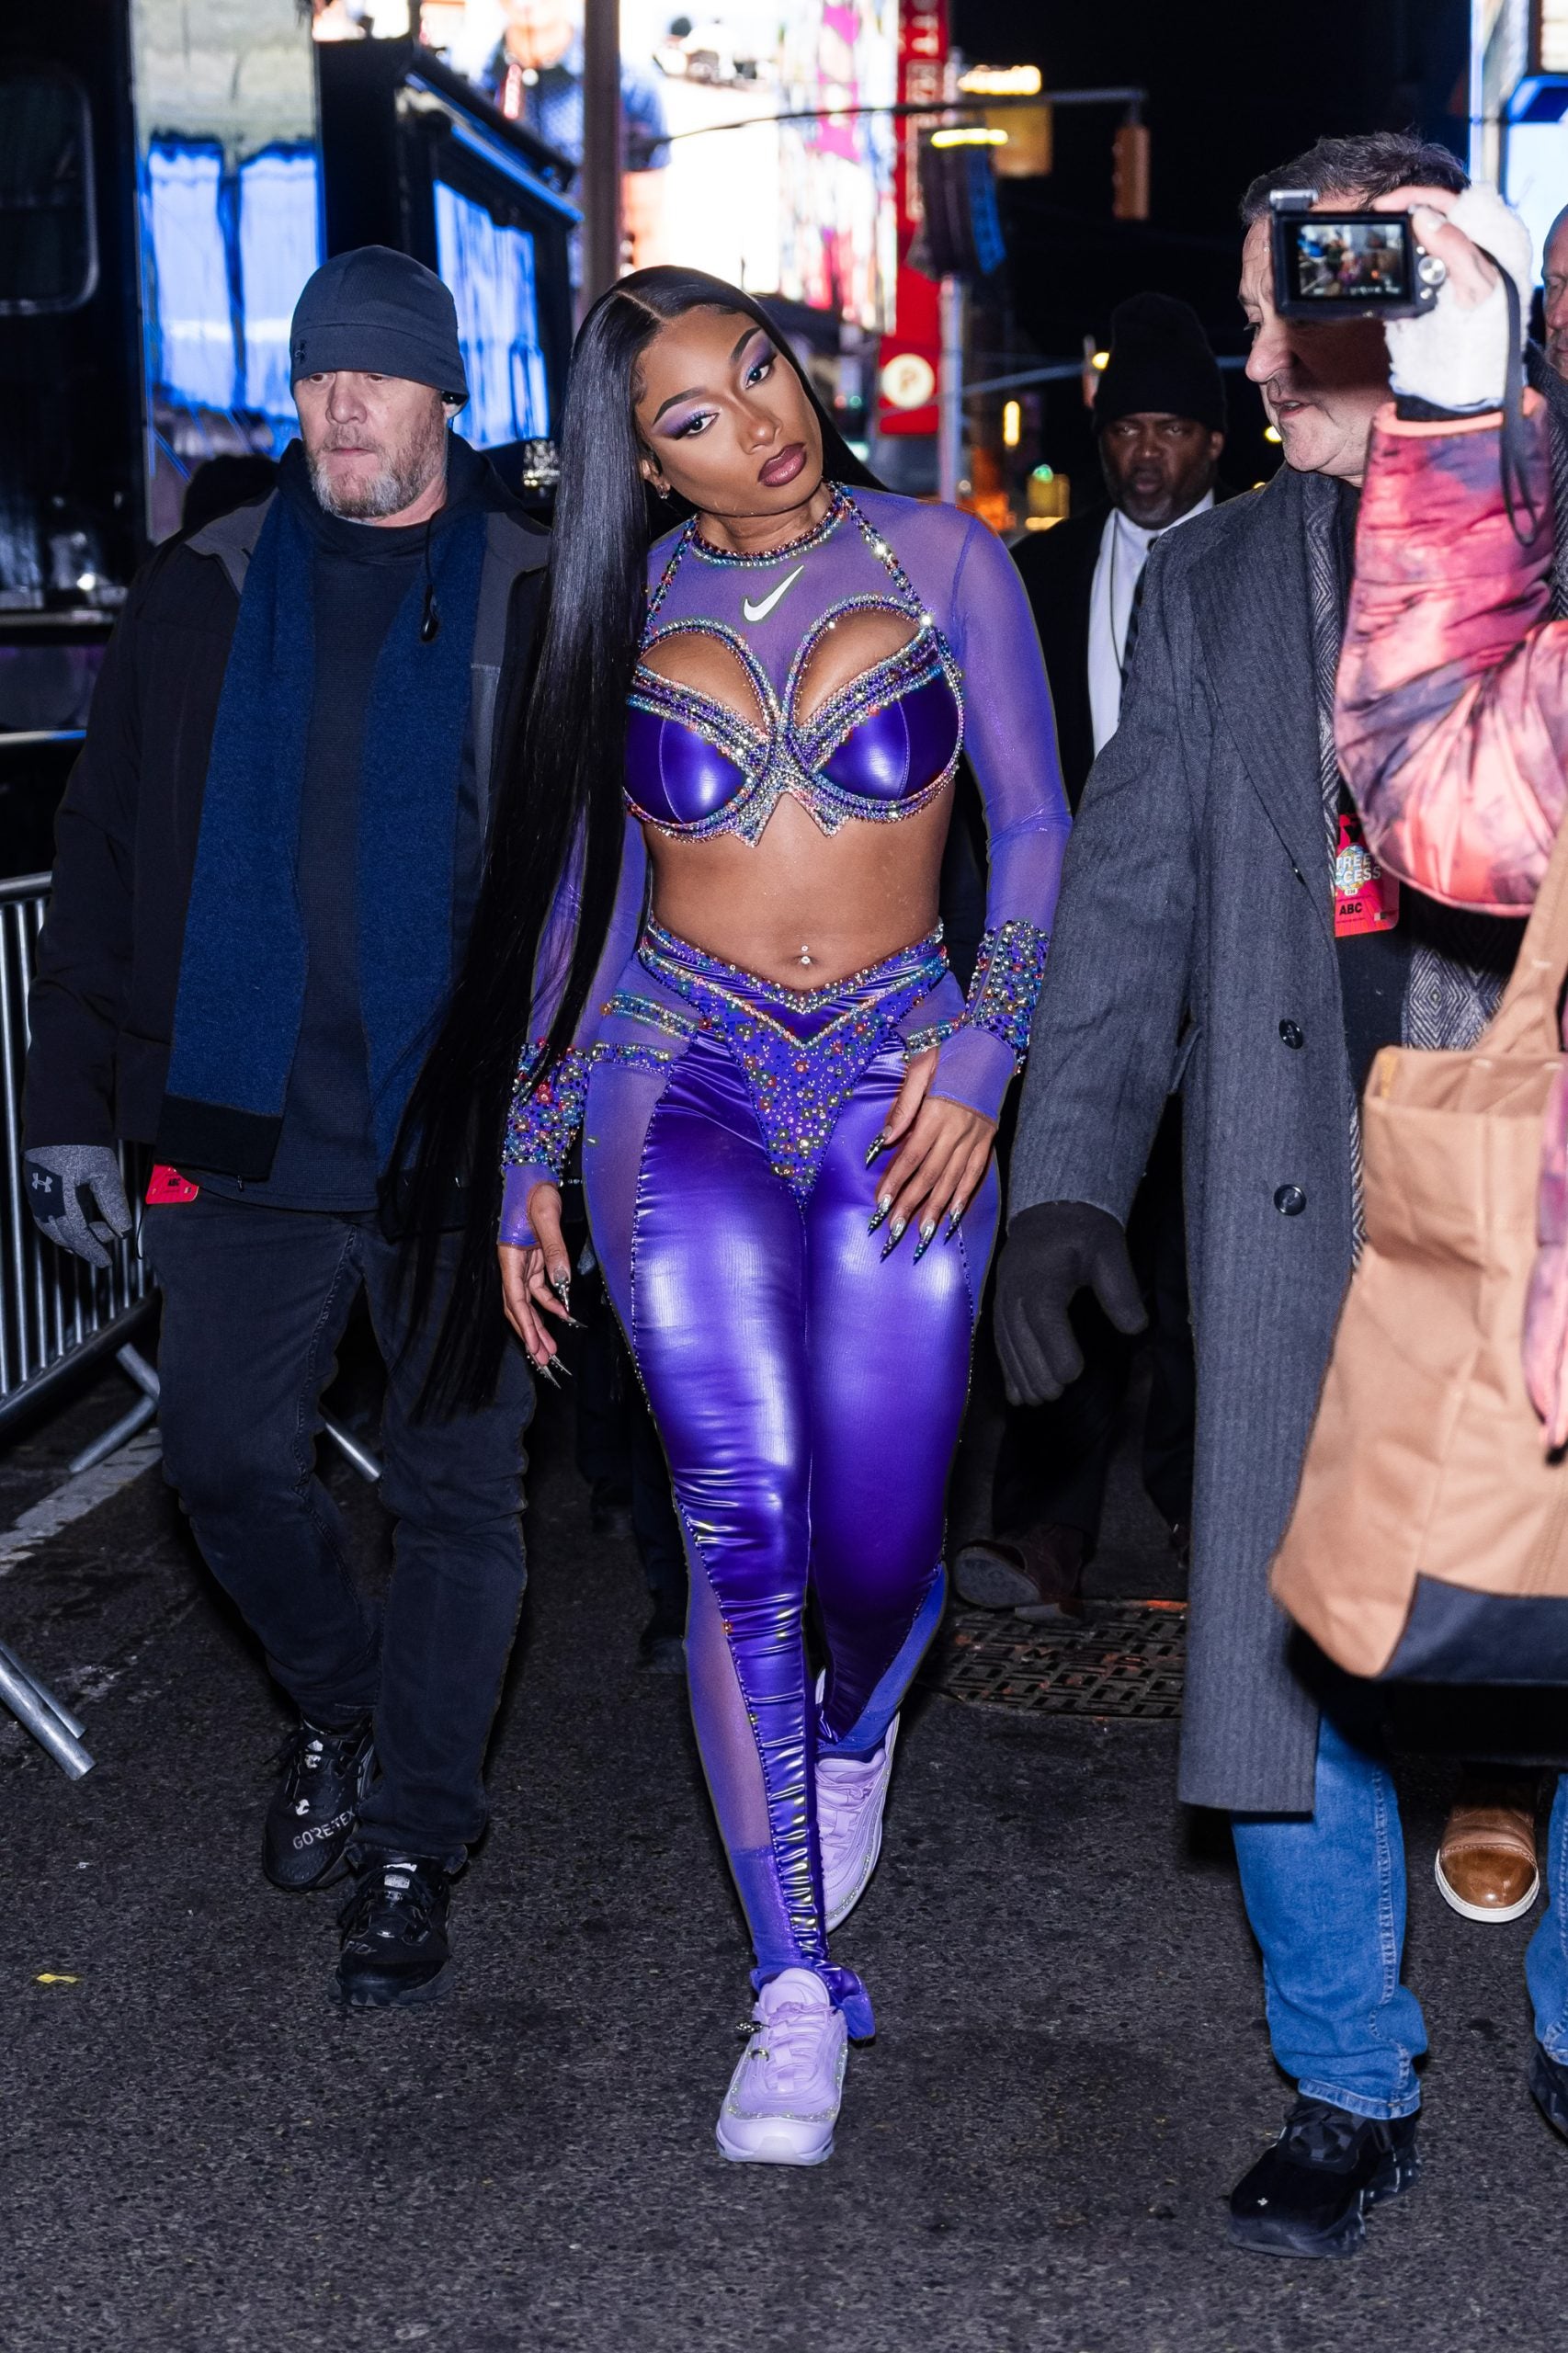 In Case You Missed It: Megan Thee Stallion Wears Nike For New Year’s Eve, Gucci Vault Ends, And More